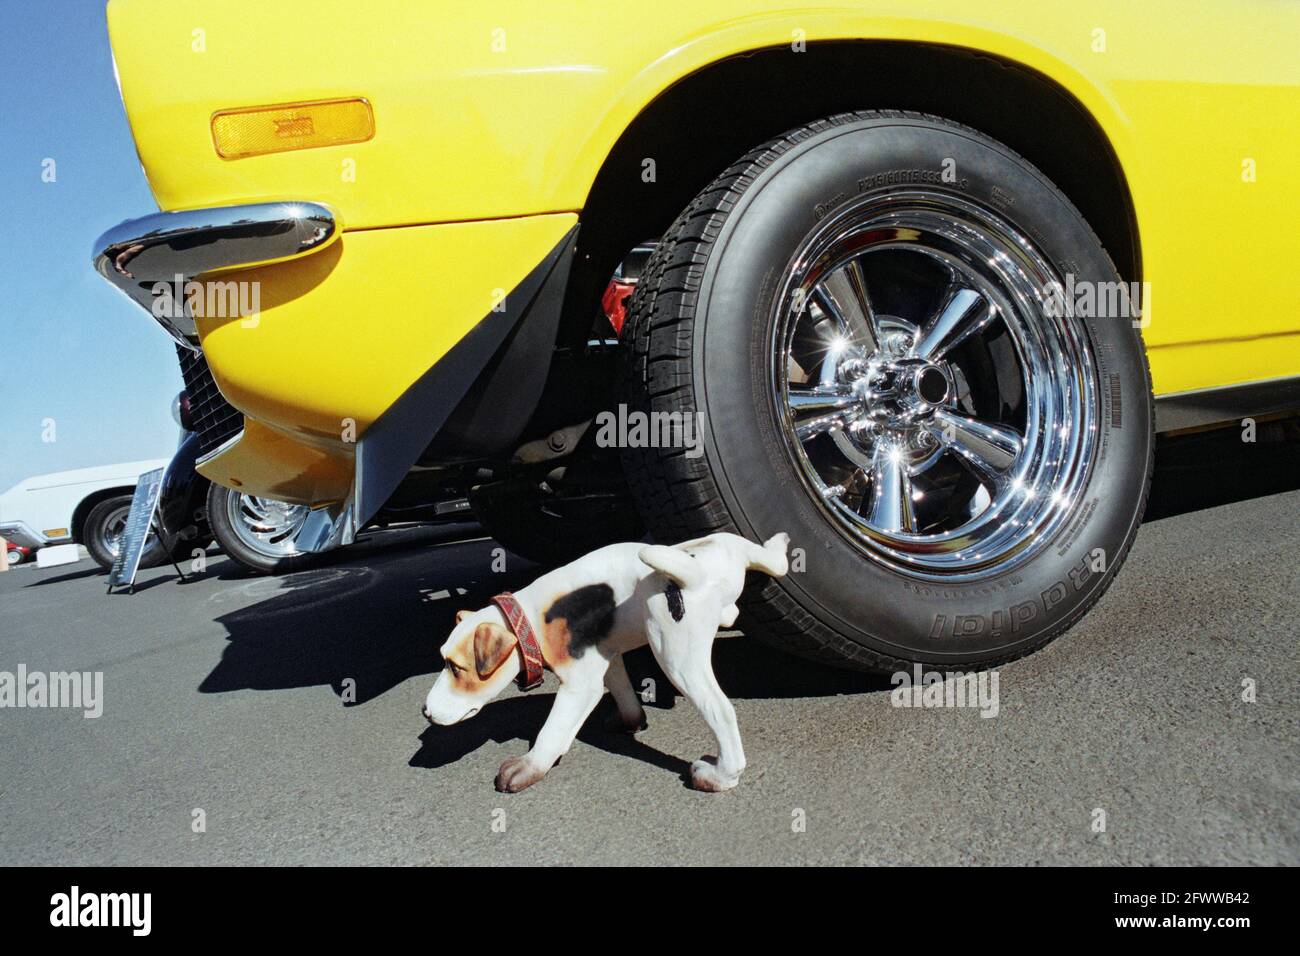 A sculpture of a dog lifting its leg by the tire of a 1970 Chevrolet Camaro Z28 at a car show. Stock Photo